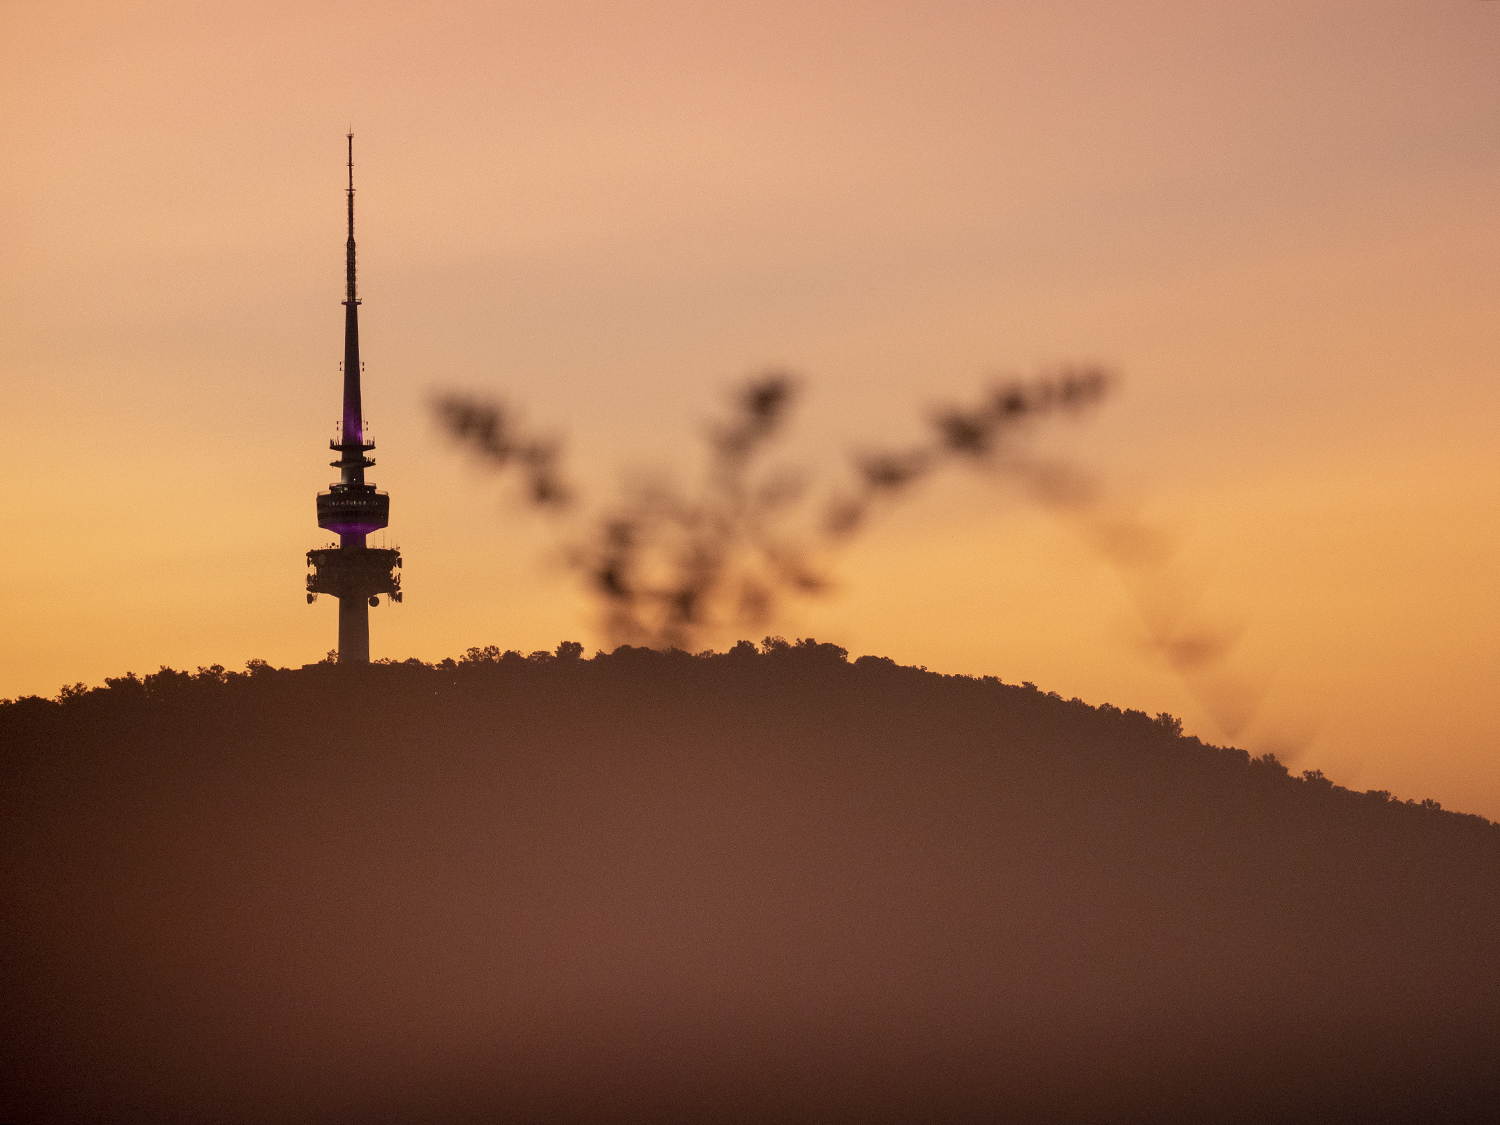 Telstra Tower, Black Mountain Canberra